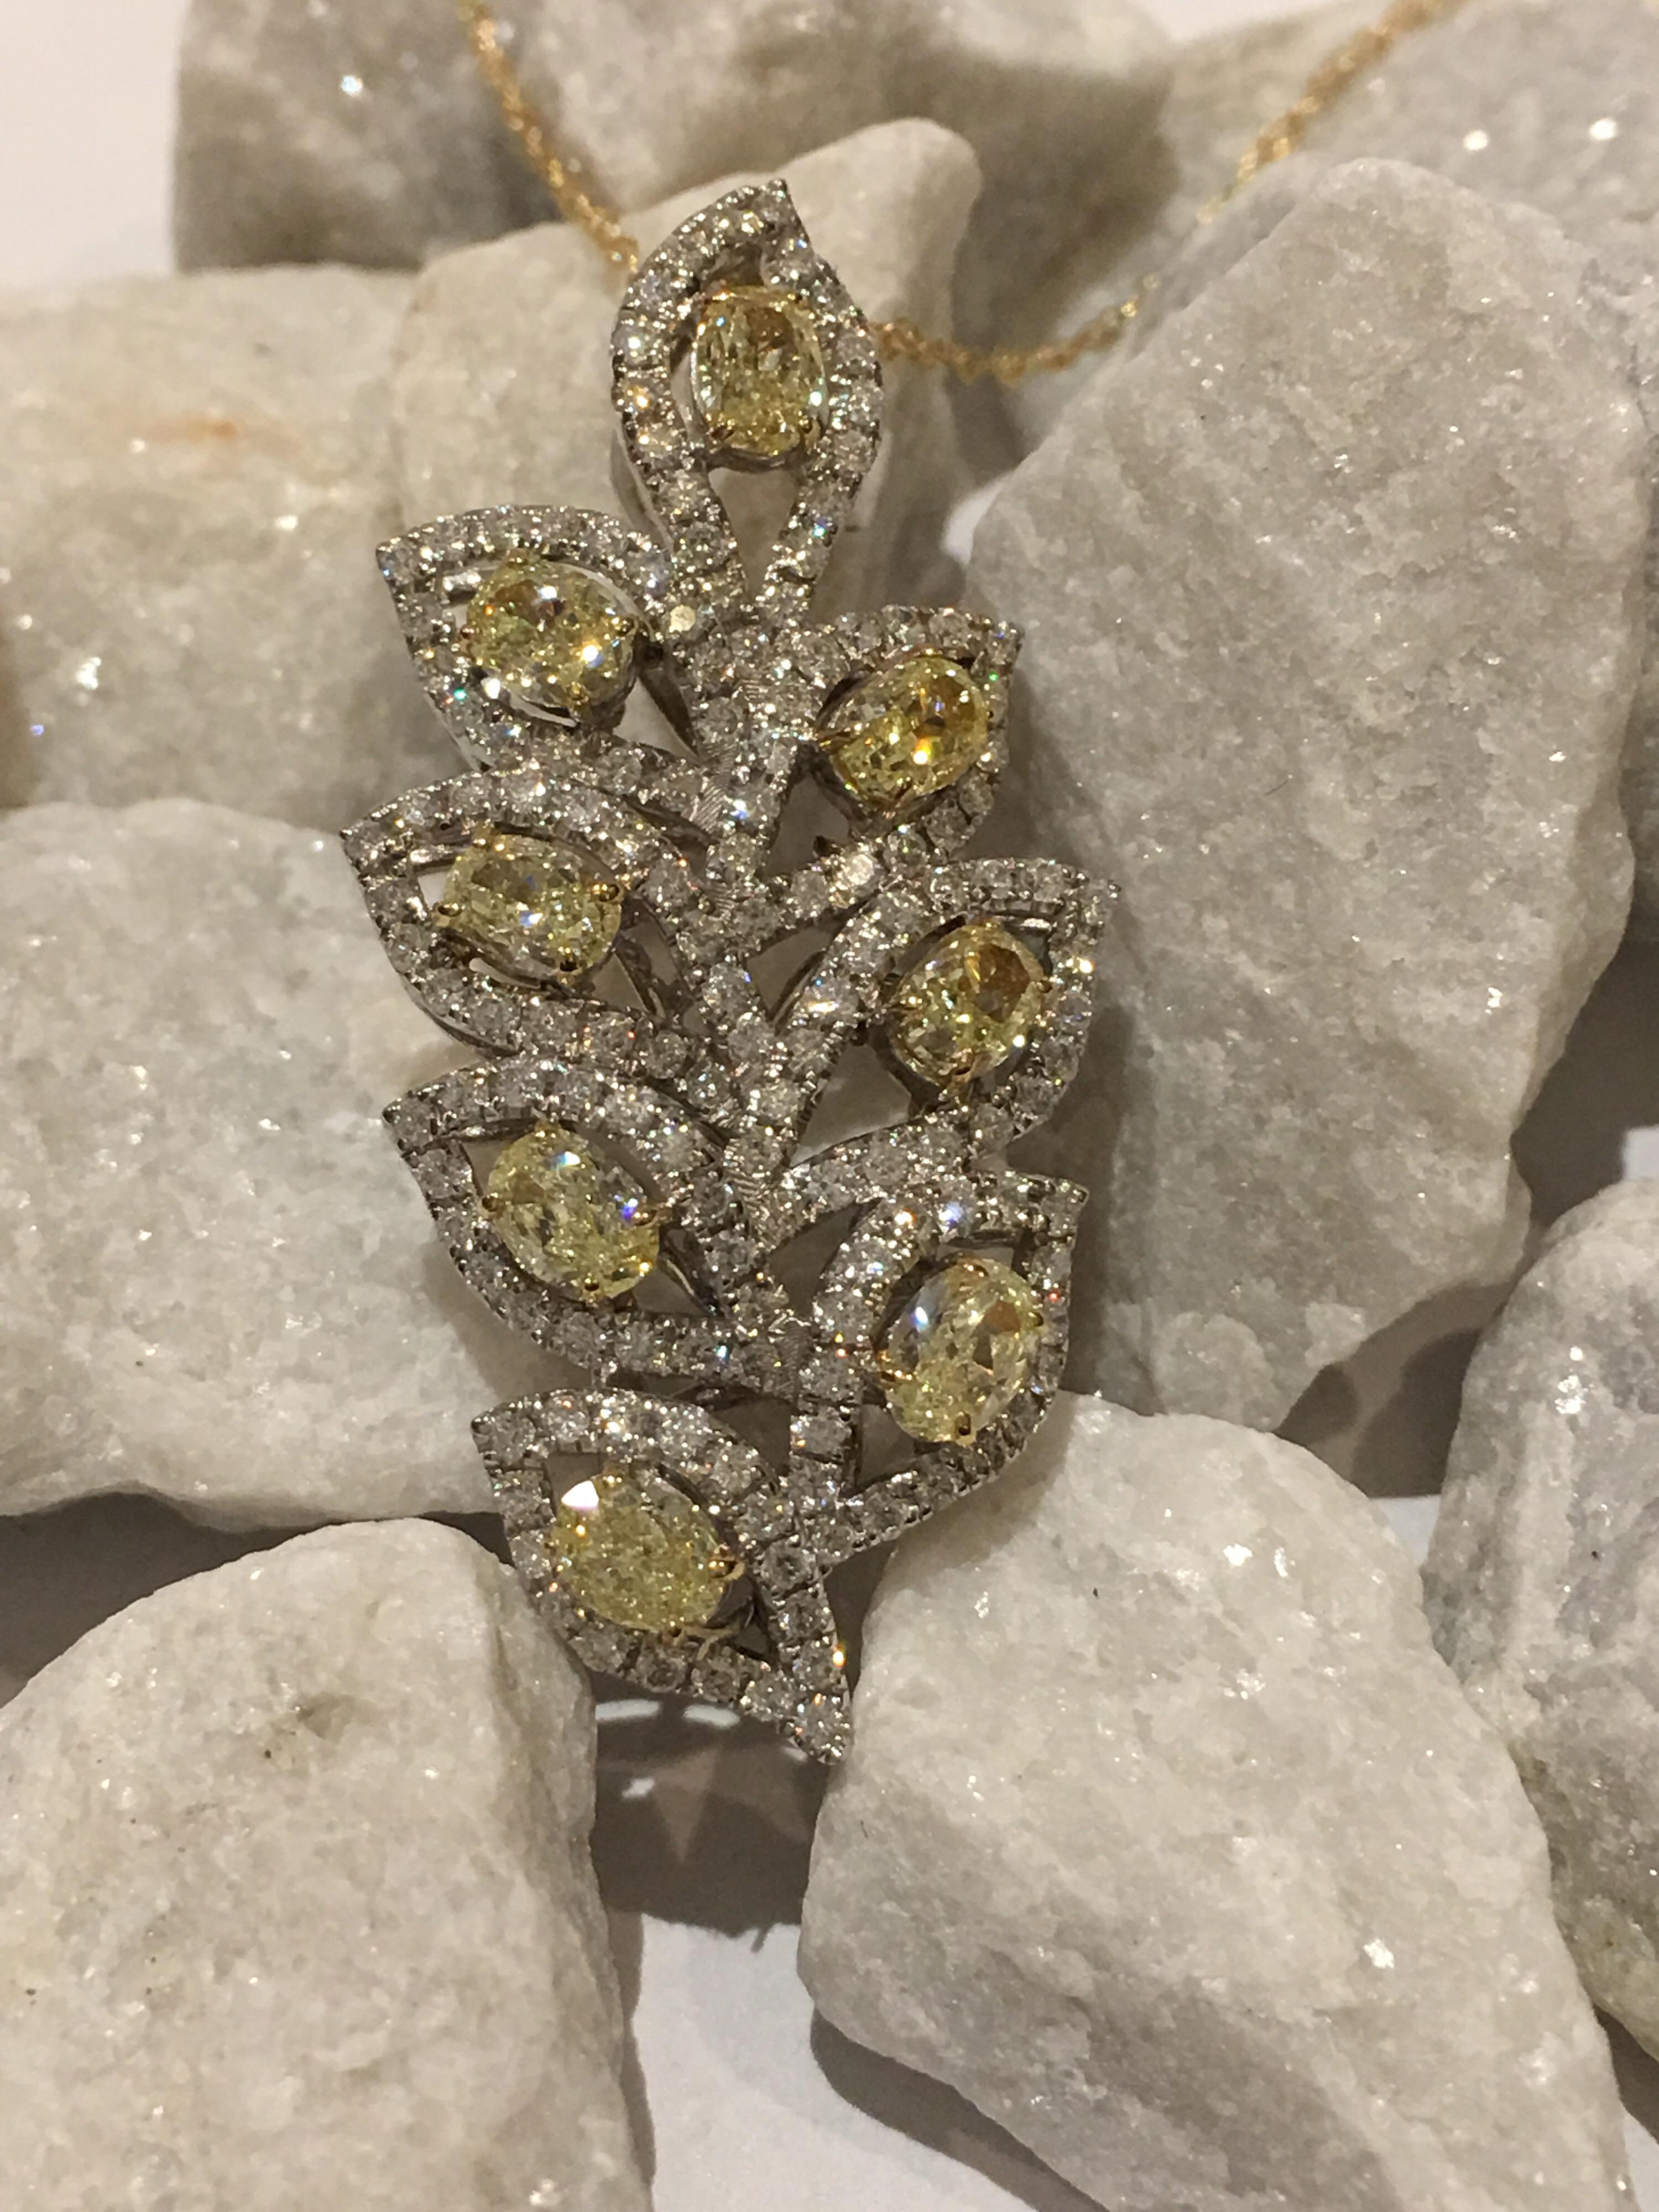 Oval Yellow Diamond and White Round Diamond Leaf Pendant set in 18K Two tone gold , with 18 inch  Gold chain.
Oval Yellow Diamond is 1. 47 Carat and other round Diamond is 0.71 Carat. The pendant is one of a kind hand crafted. 